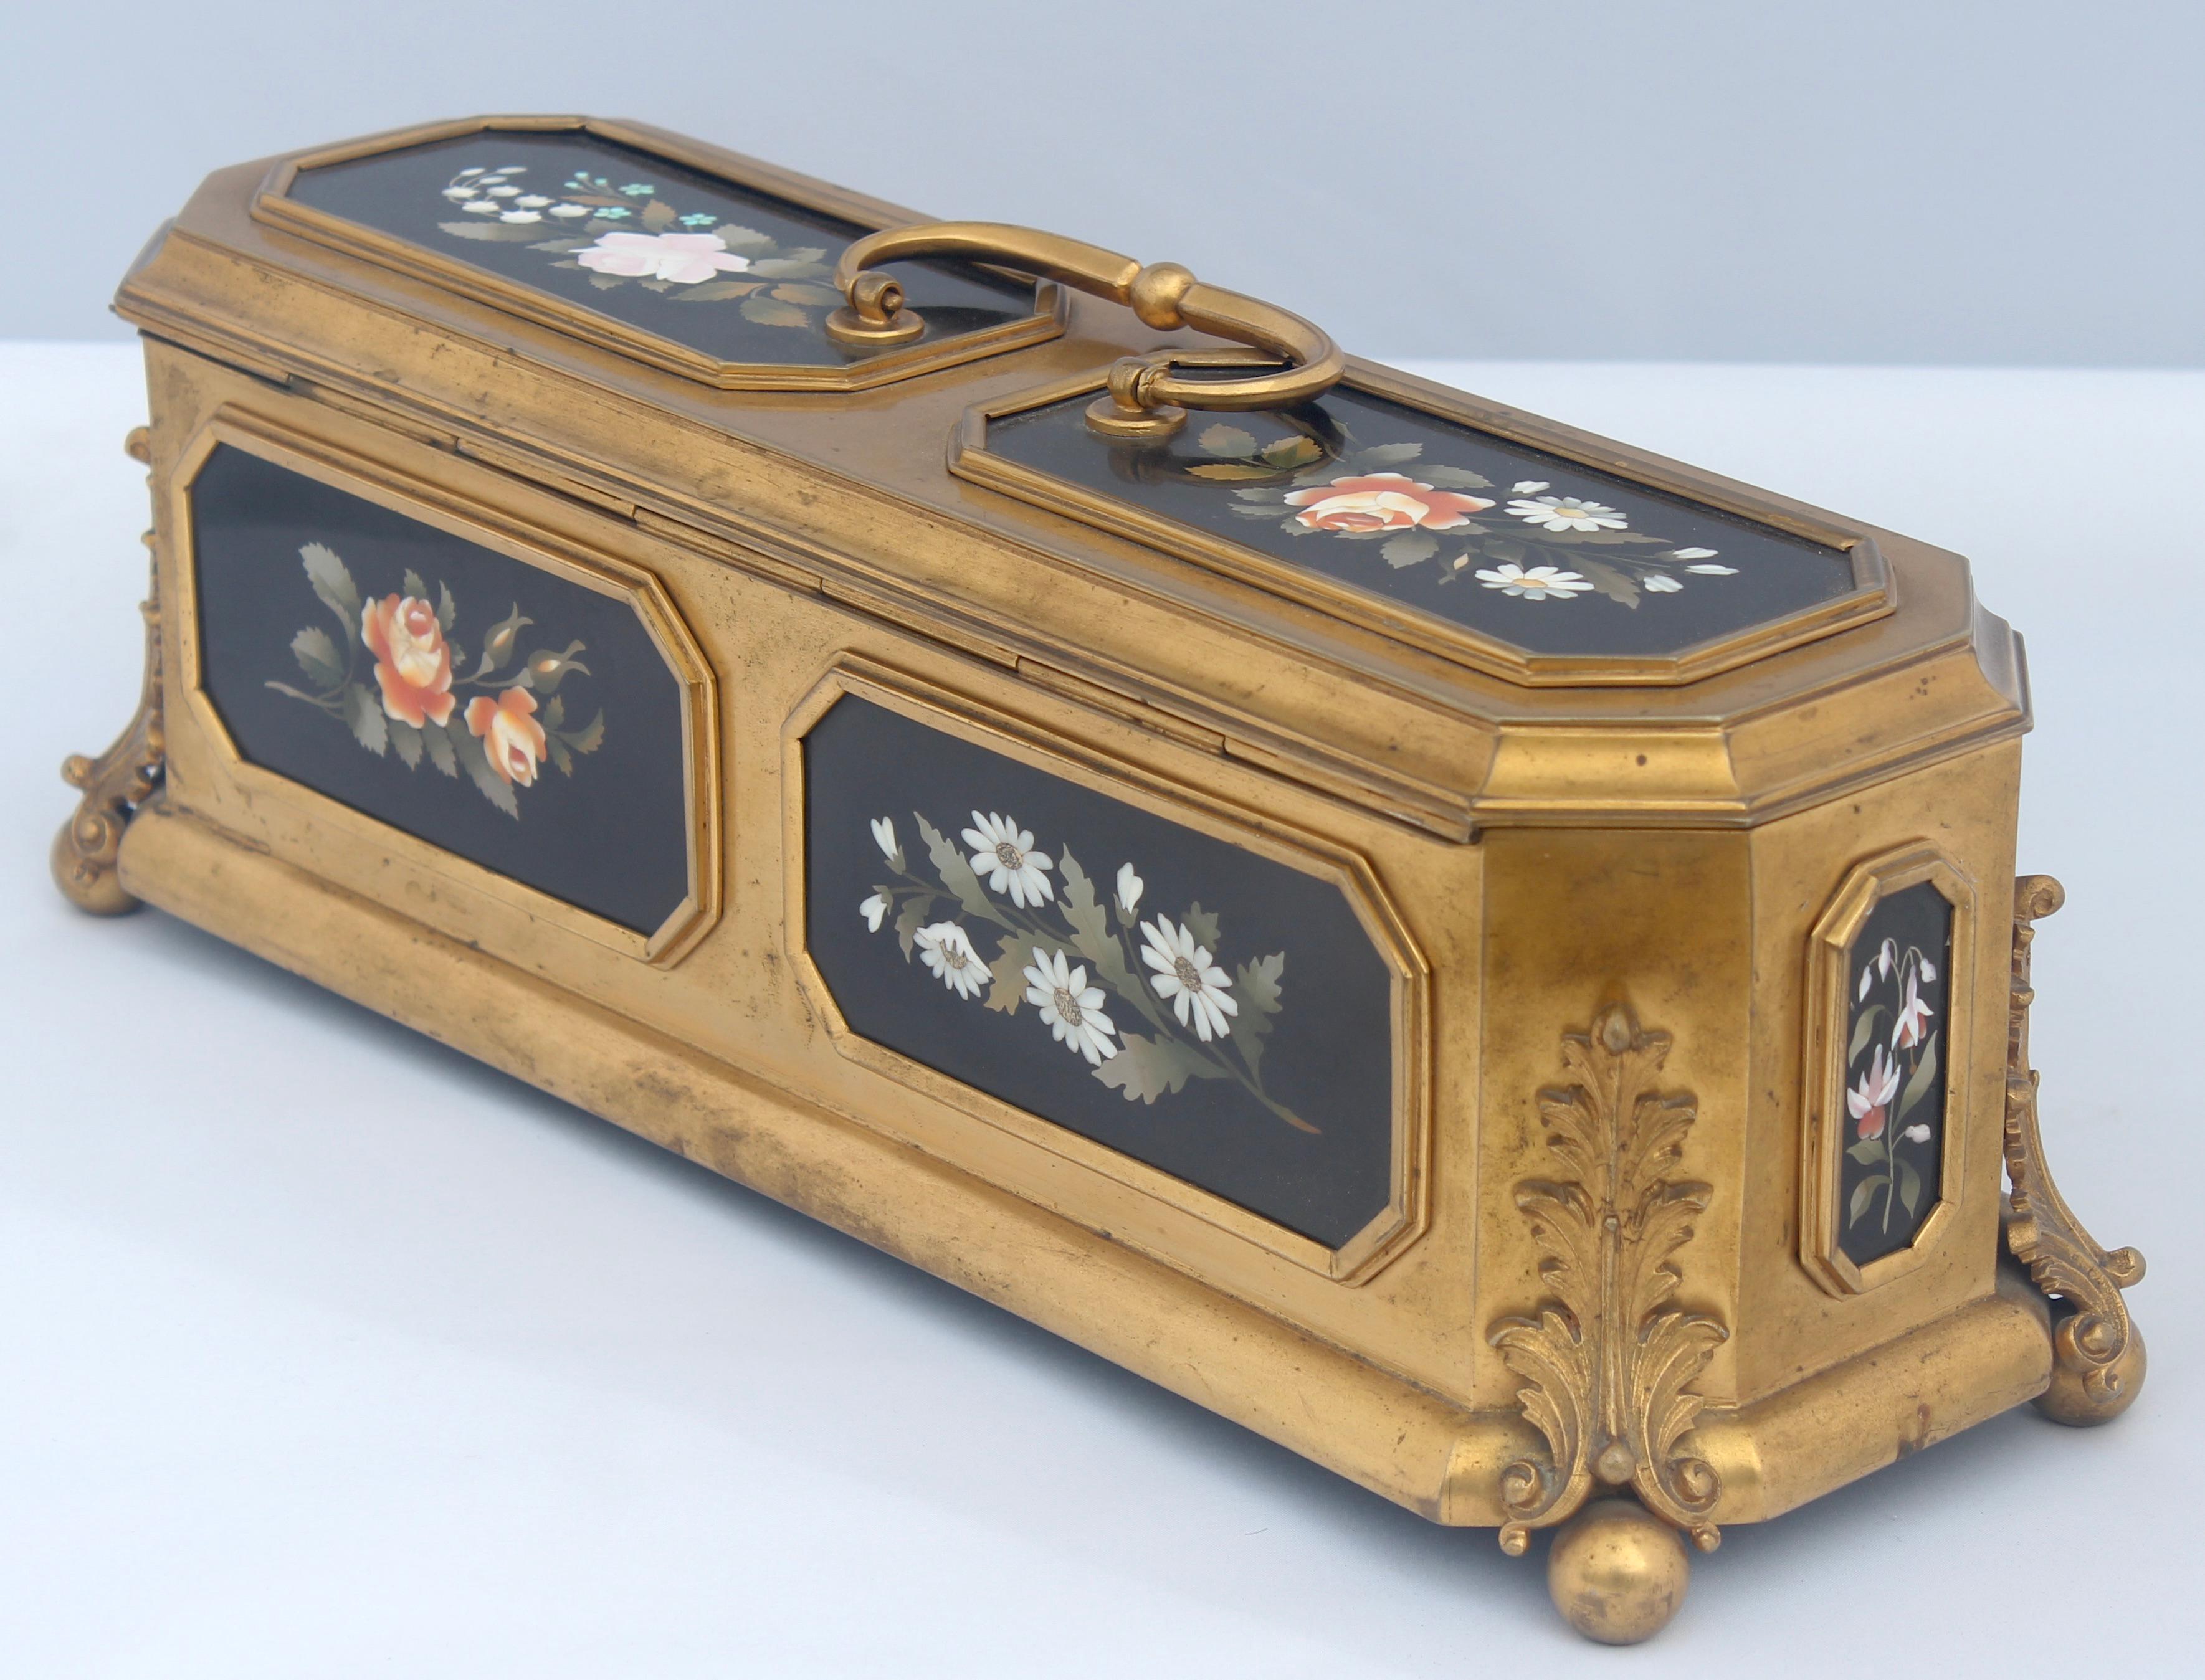 Mid-19th Century French 19th Century Gilt-Bronze and Pietra Dura Inset Jewelry Casket